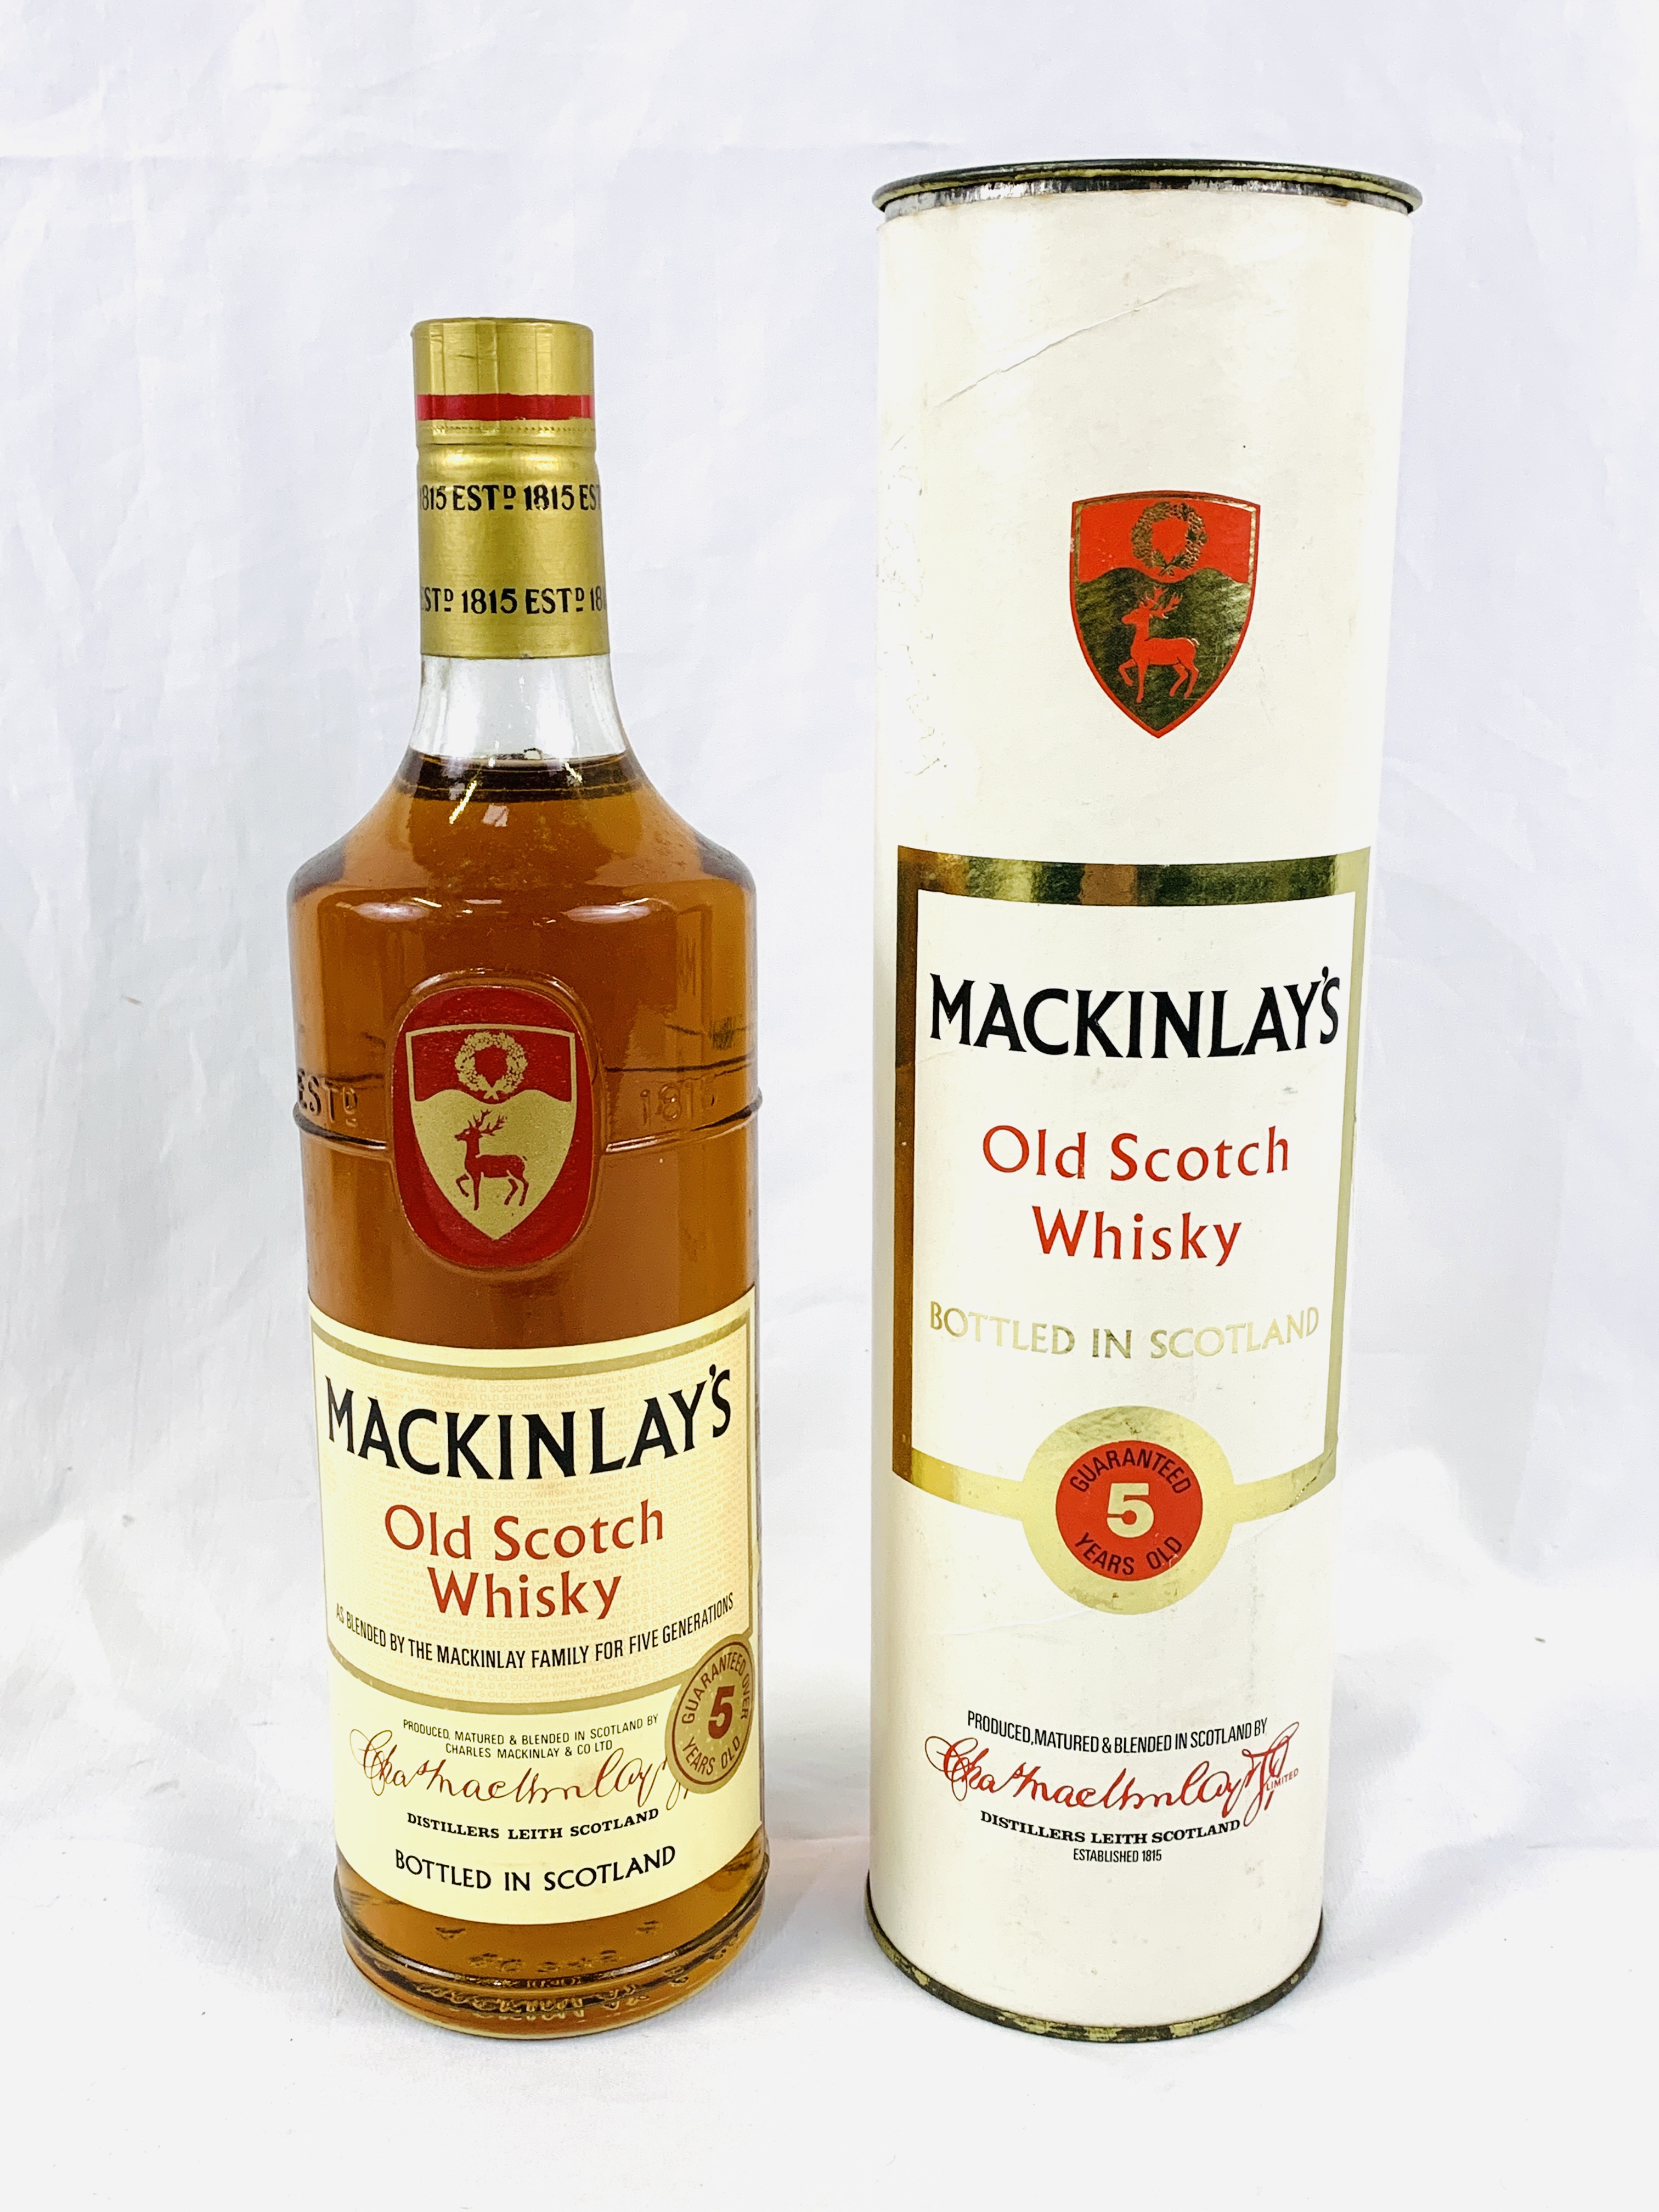 Bottle of Mackinlay's whisky over 35 years old.